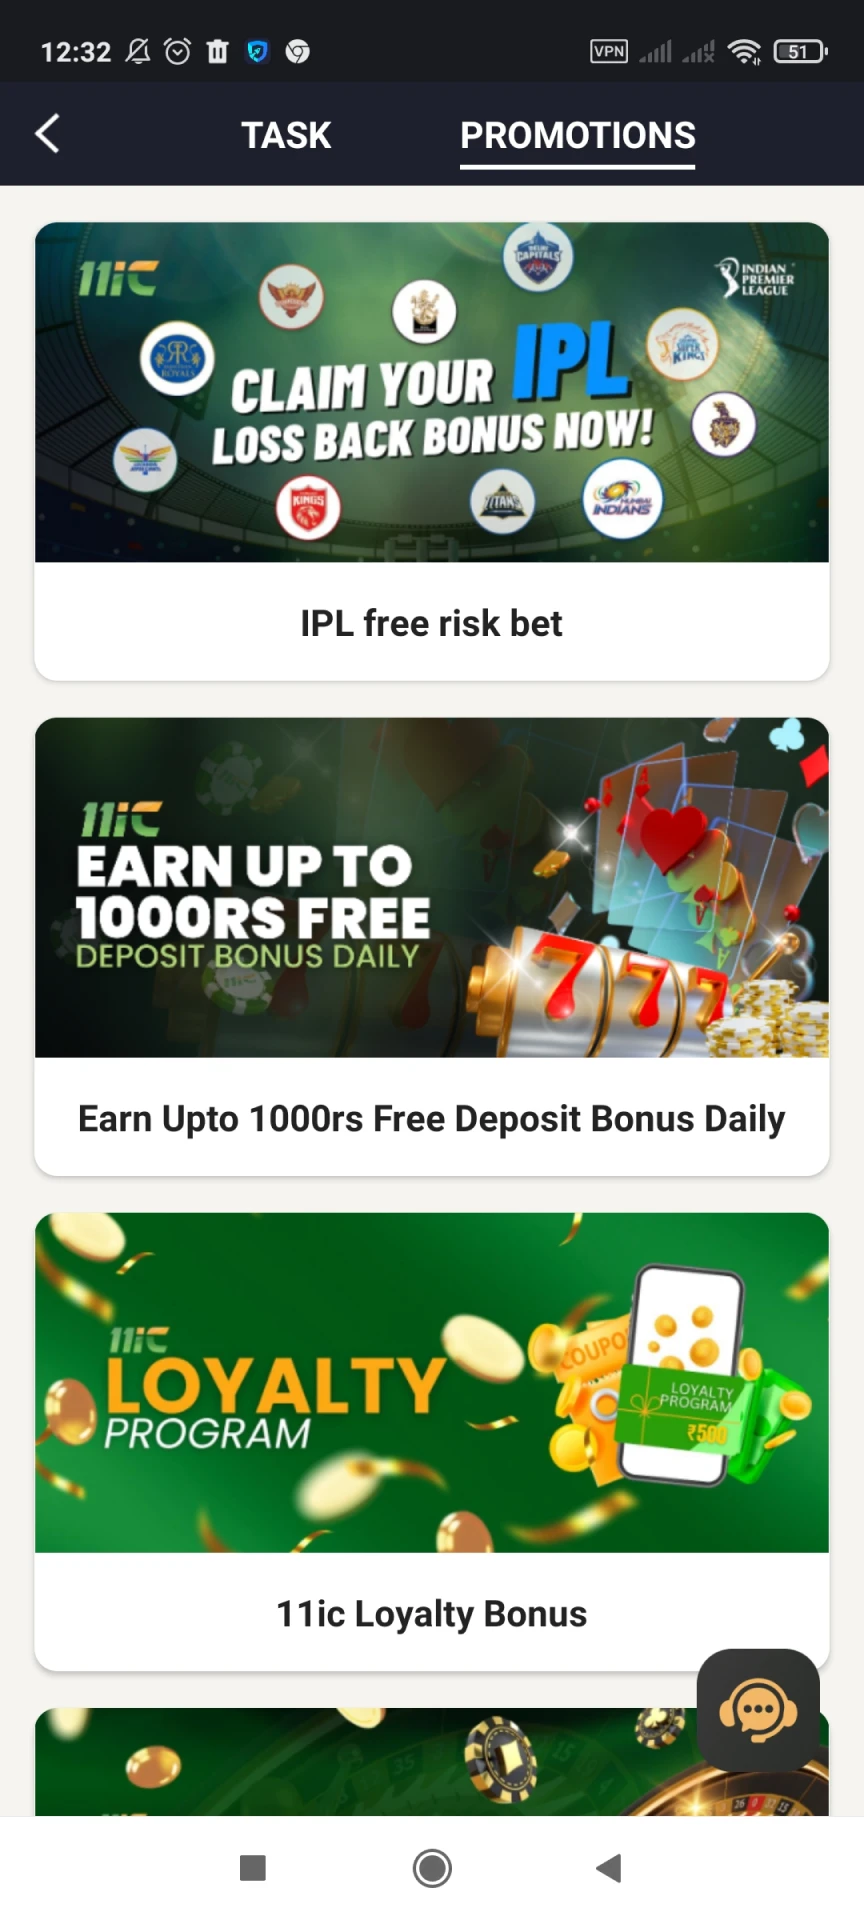 Go to the promotion section to receive bonuses on 11ic.